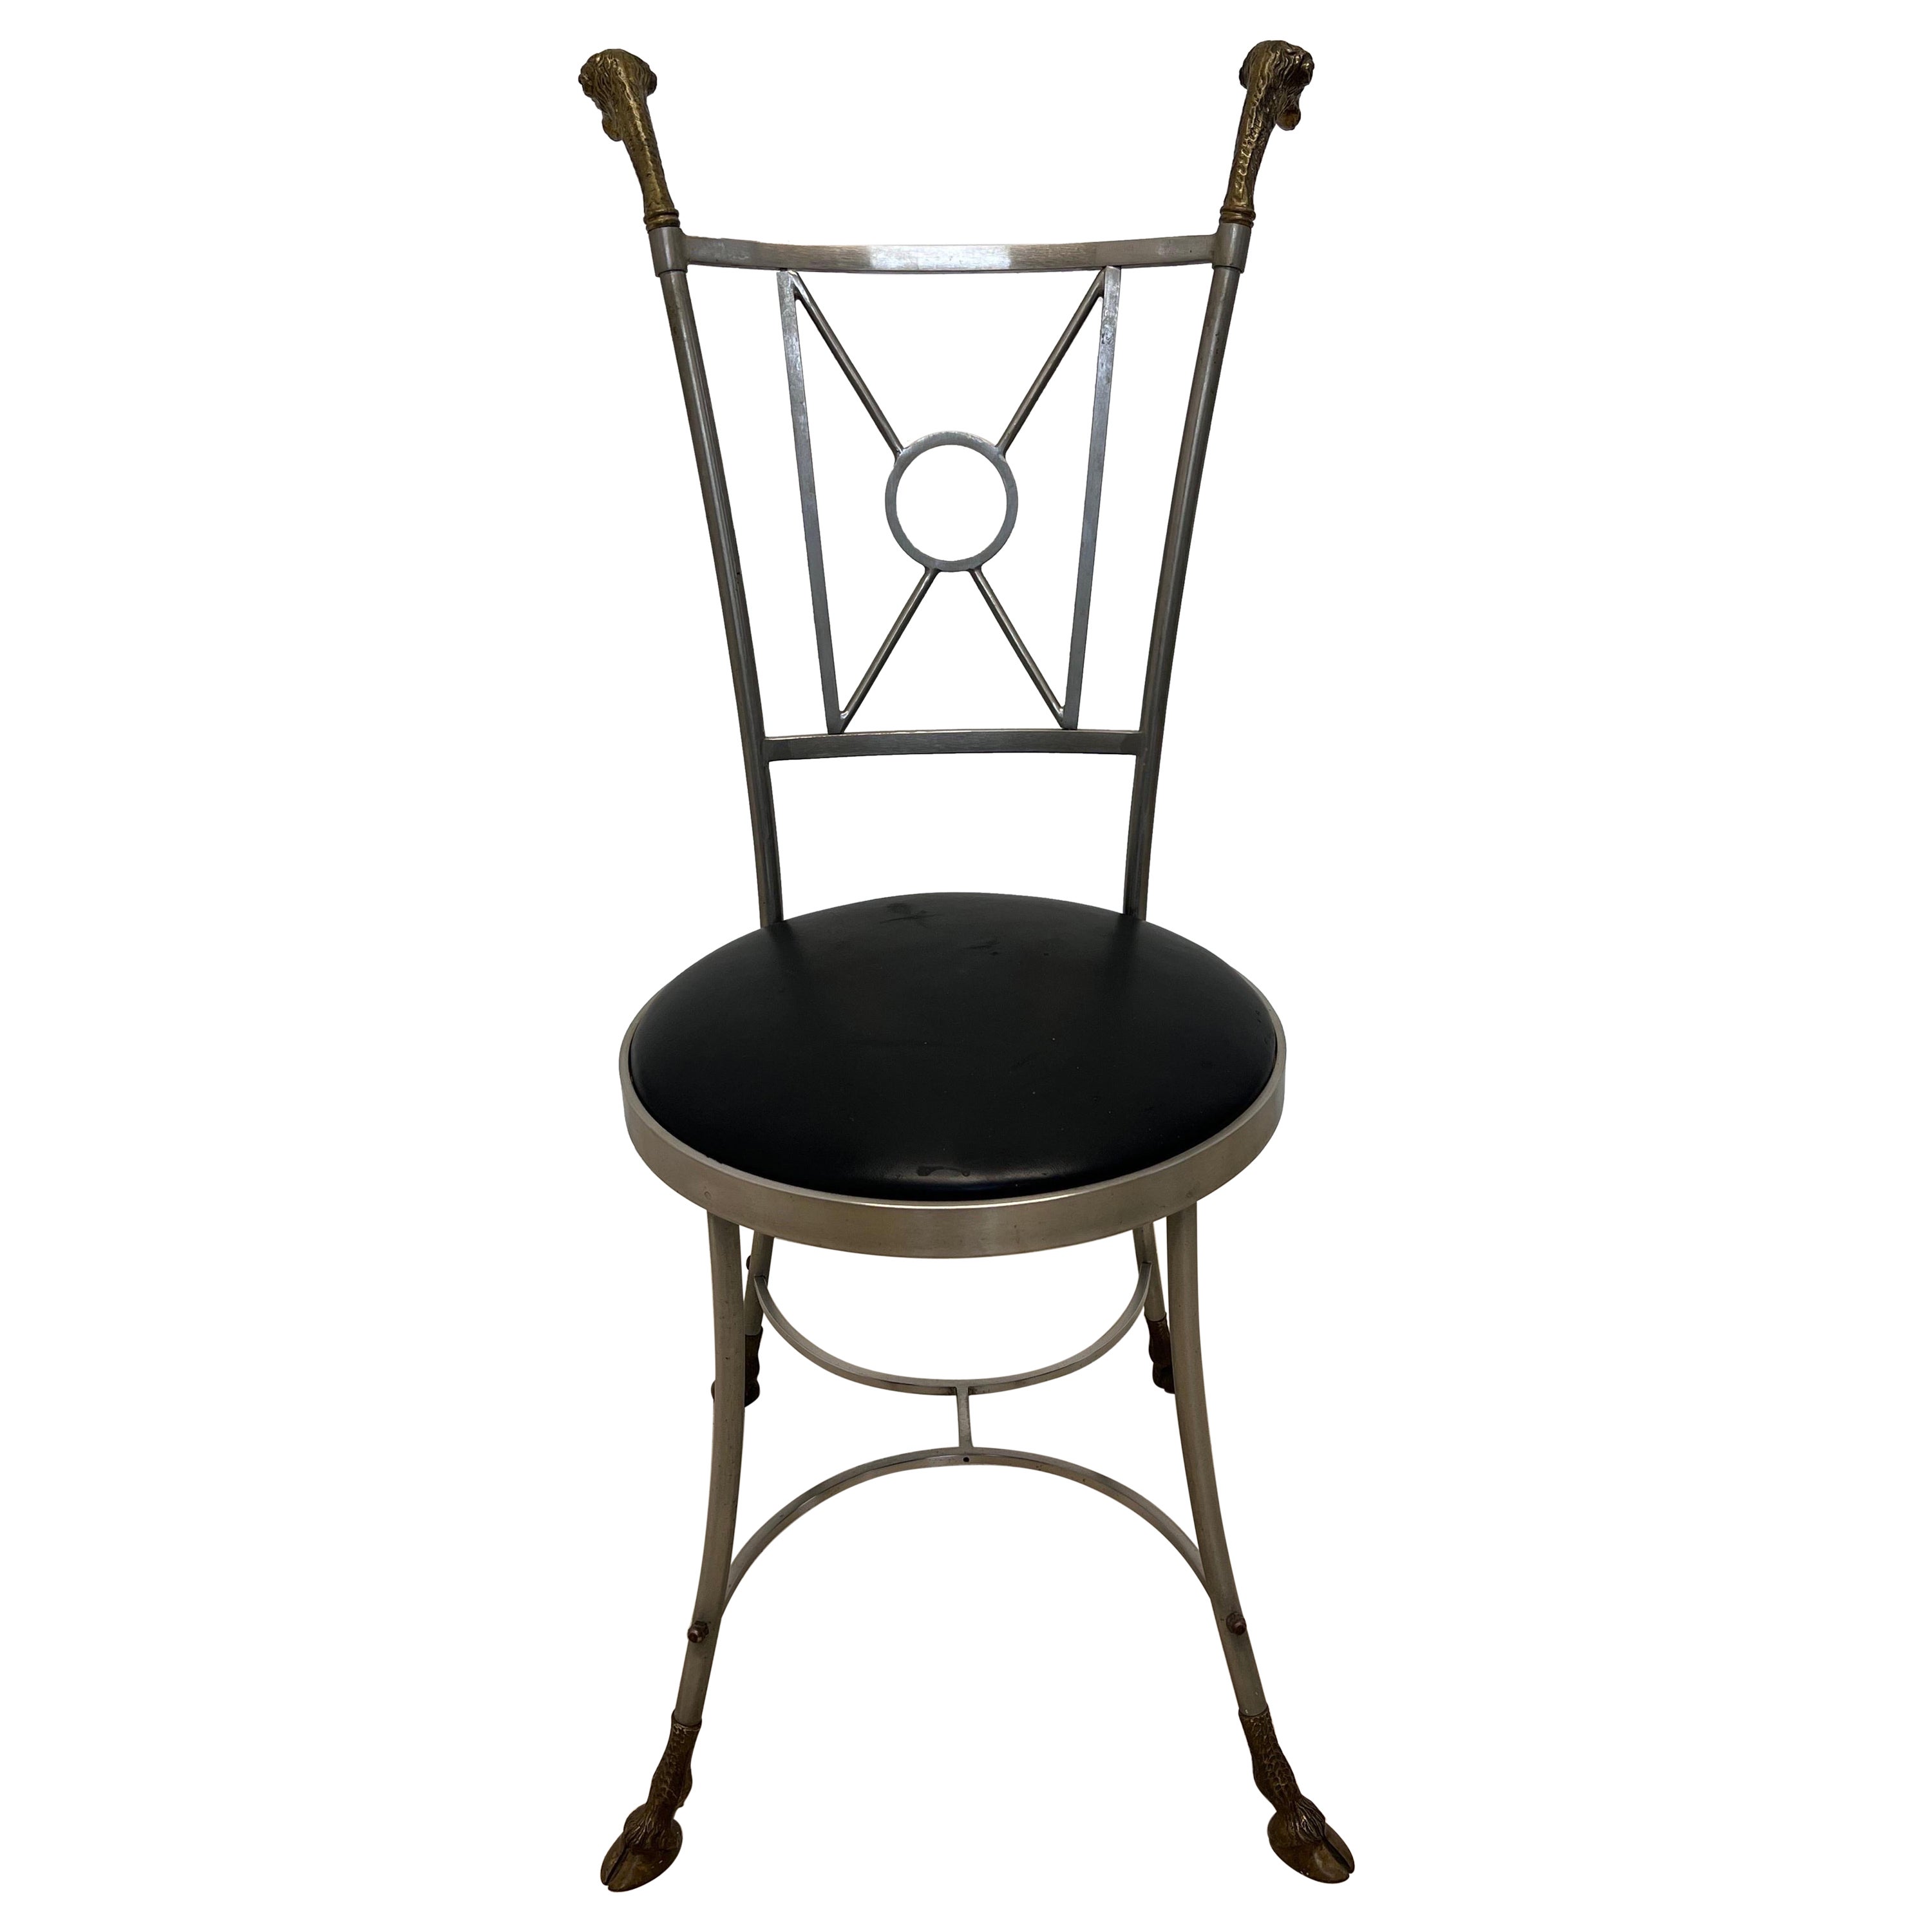 Maison Jansen Style Rams Head and Steel Chair with Leather Seat